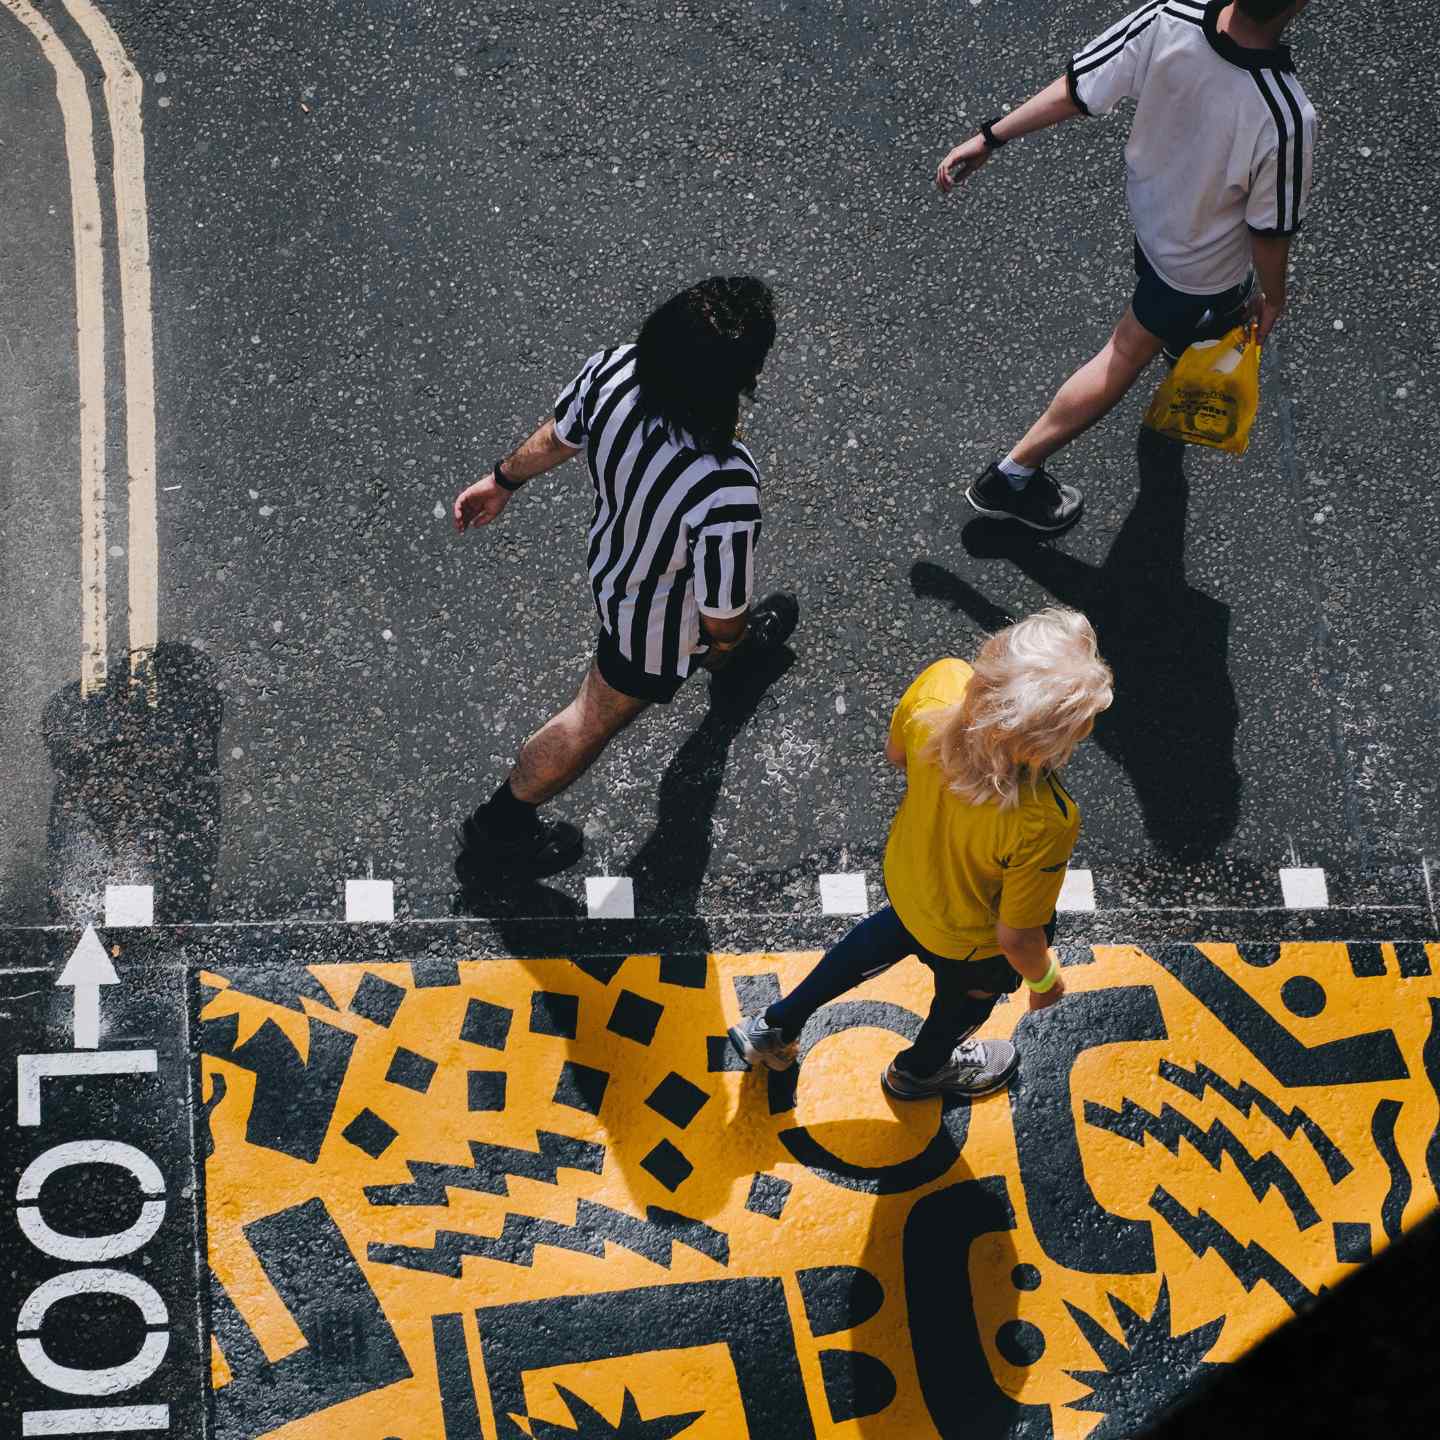 Three friends walking down the street in black and white clothes with yellow and black street art on the ground